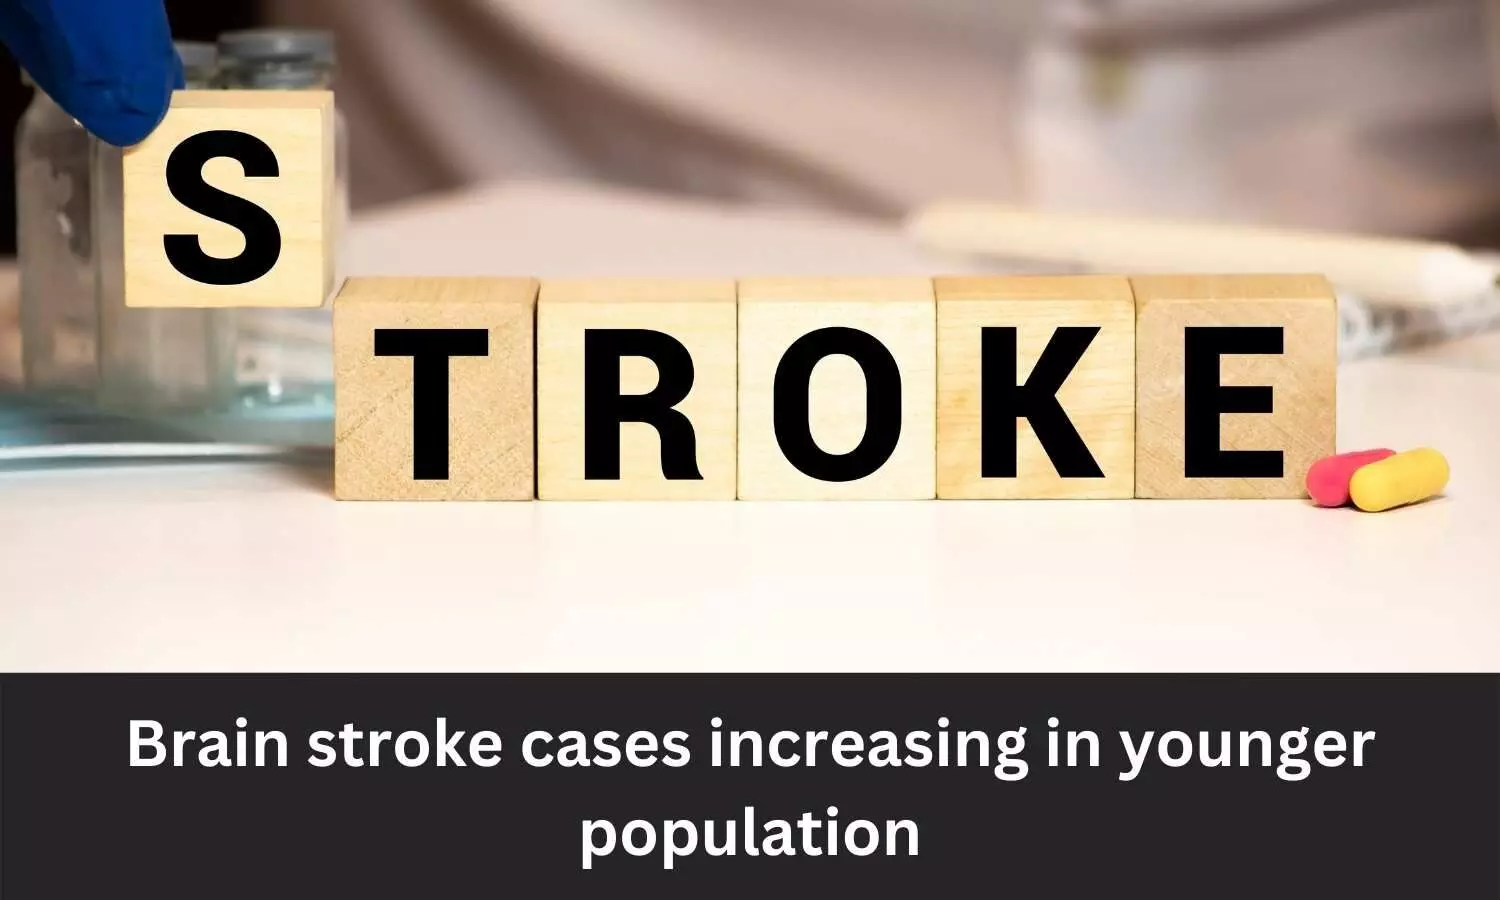 Brain stroke cases increasing in younger population